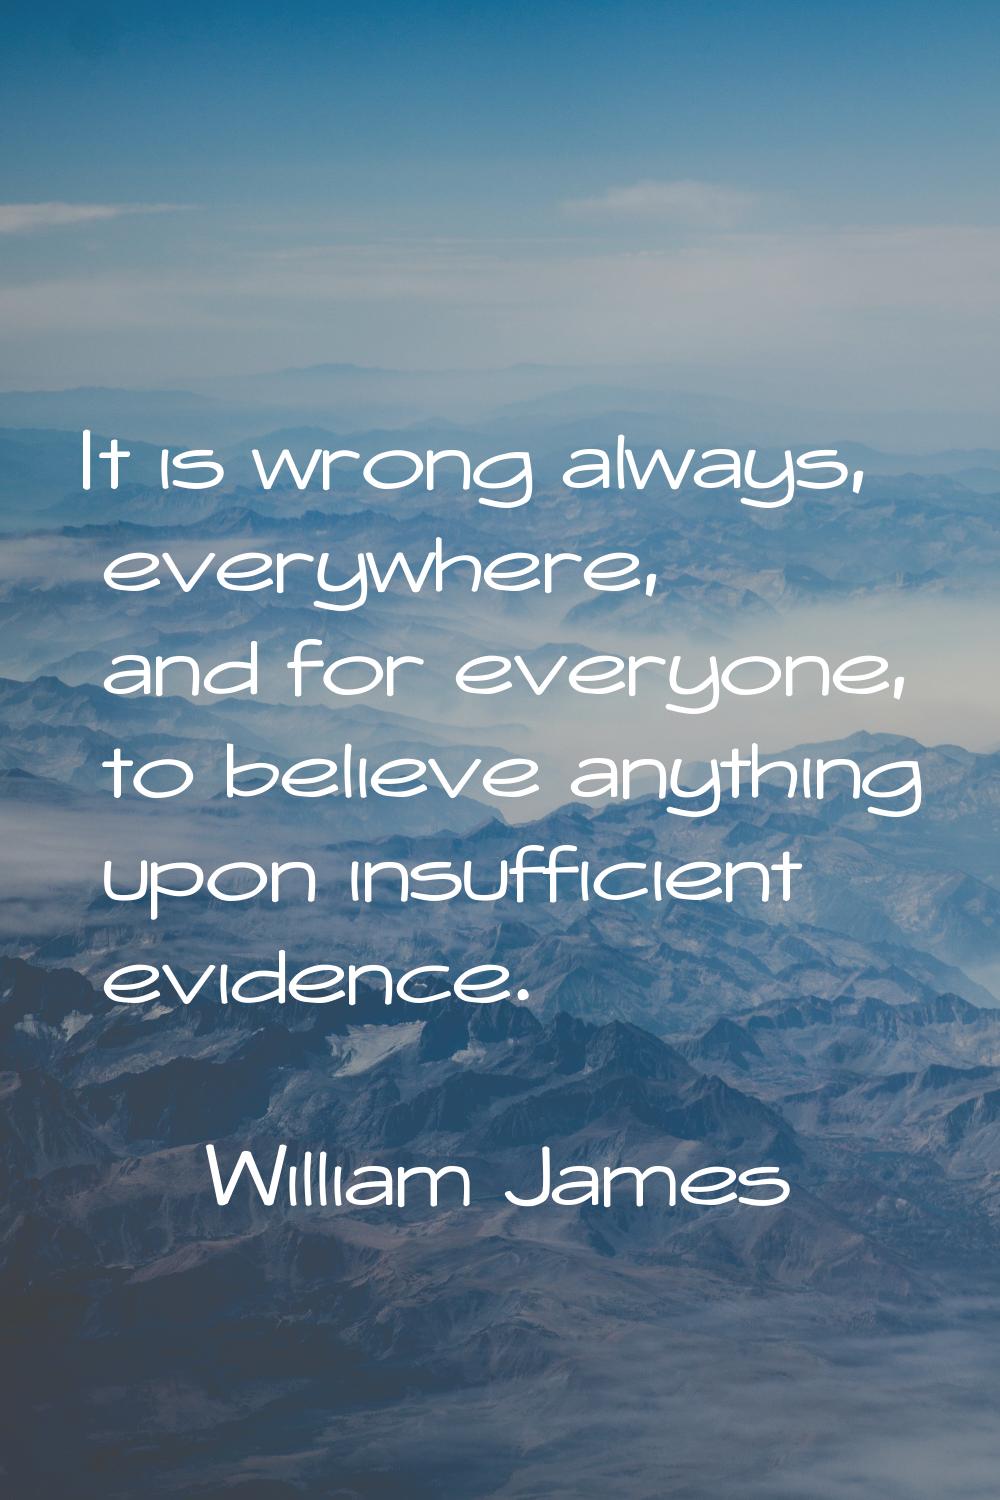 It is wrong always, everywhere, and for everyone, to believe anything upon insufficient evidence.